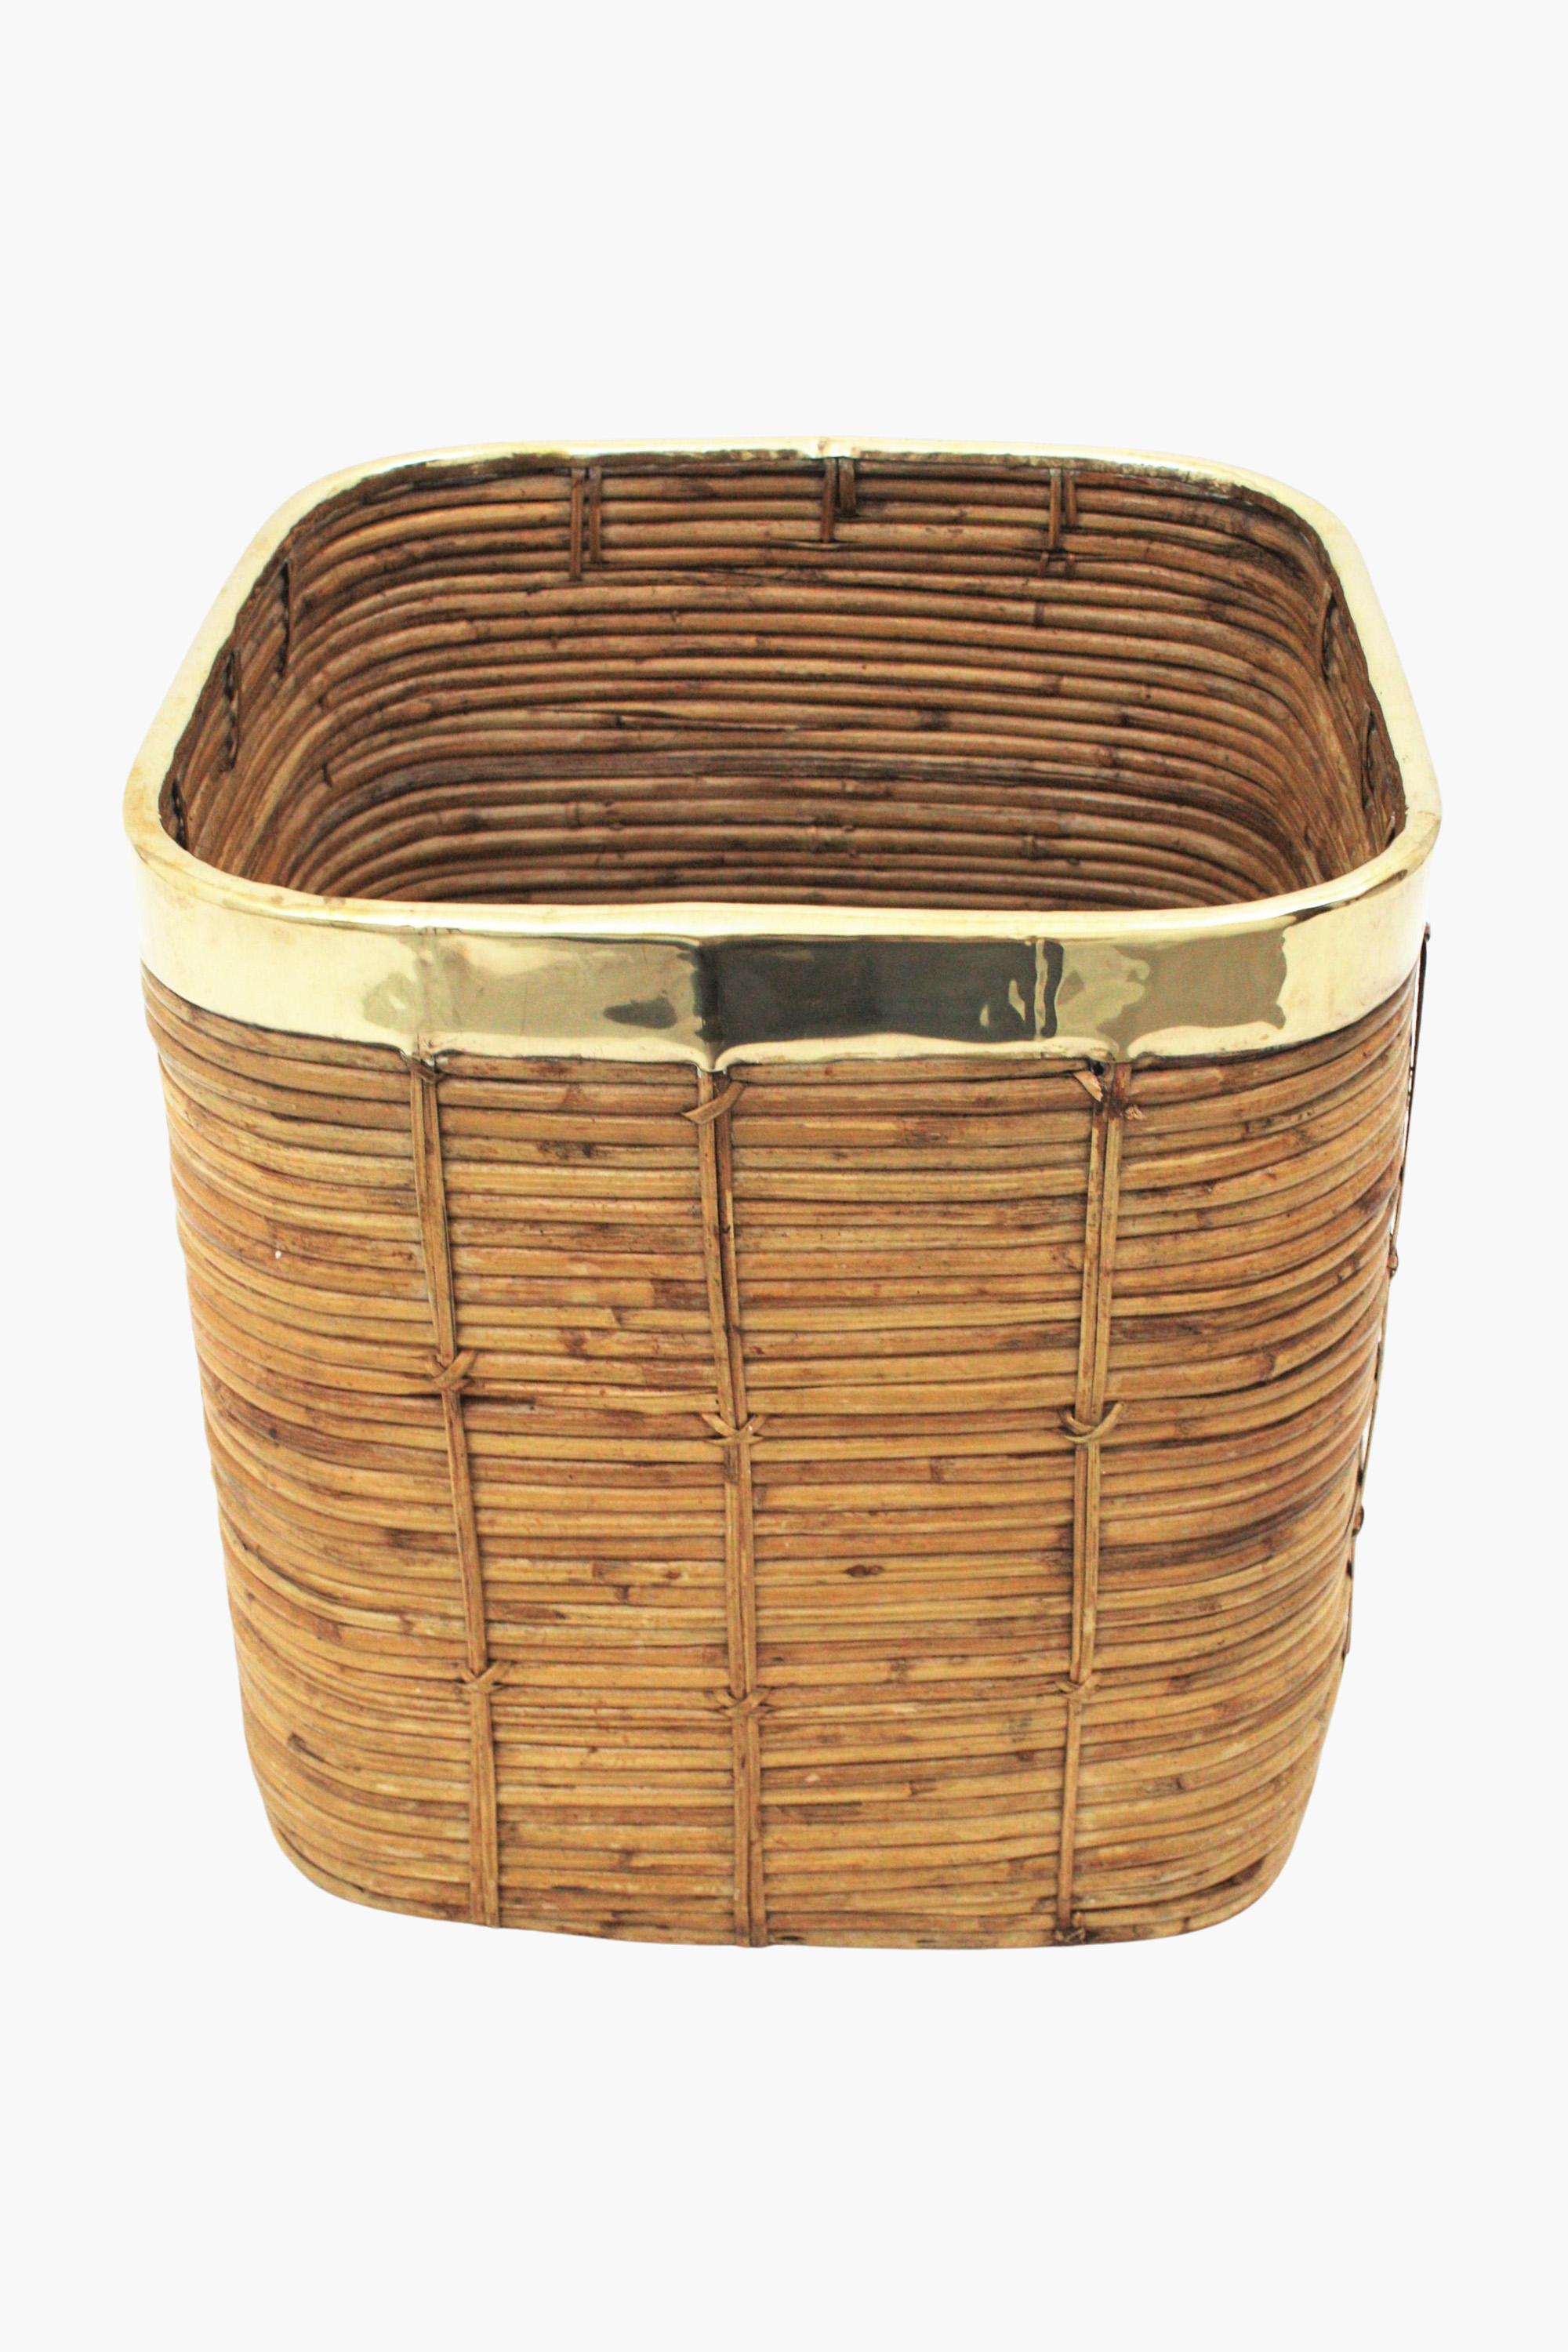 Large midcentury brass and rattan planter made in pencil cane. Rare and useful large dimensions - ideal as a planter or magazine tidy.

Handmade in Italy, 1970s, in the style of Gabriella Crespi.

From a private collection in Milan.

Overall